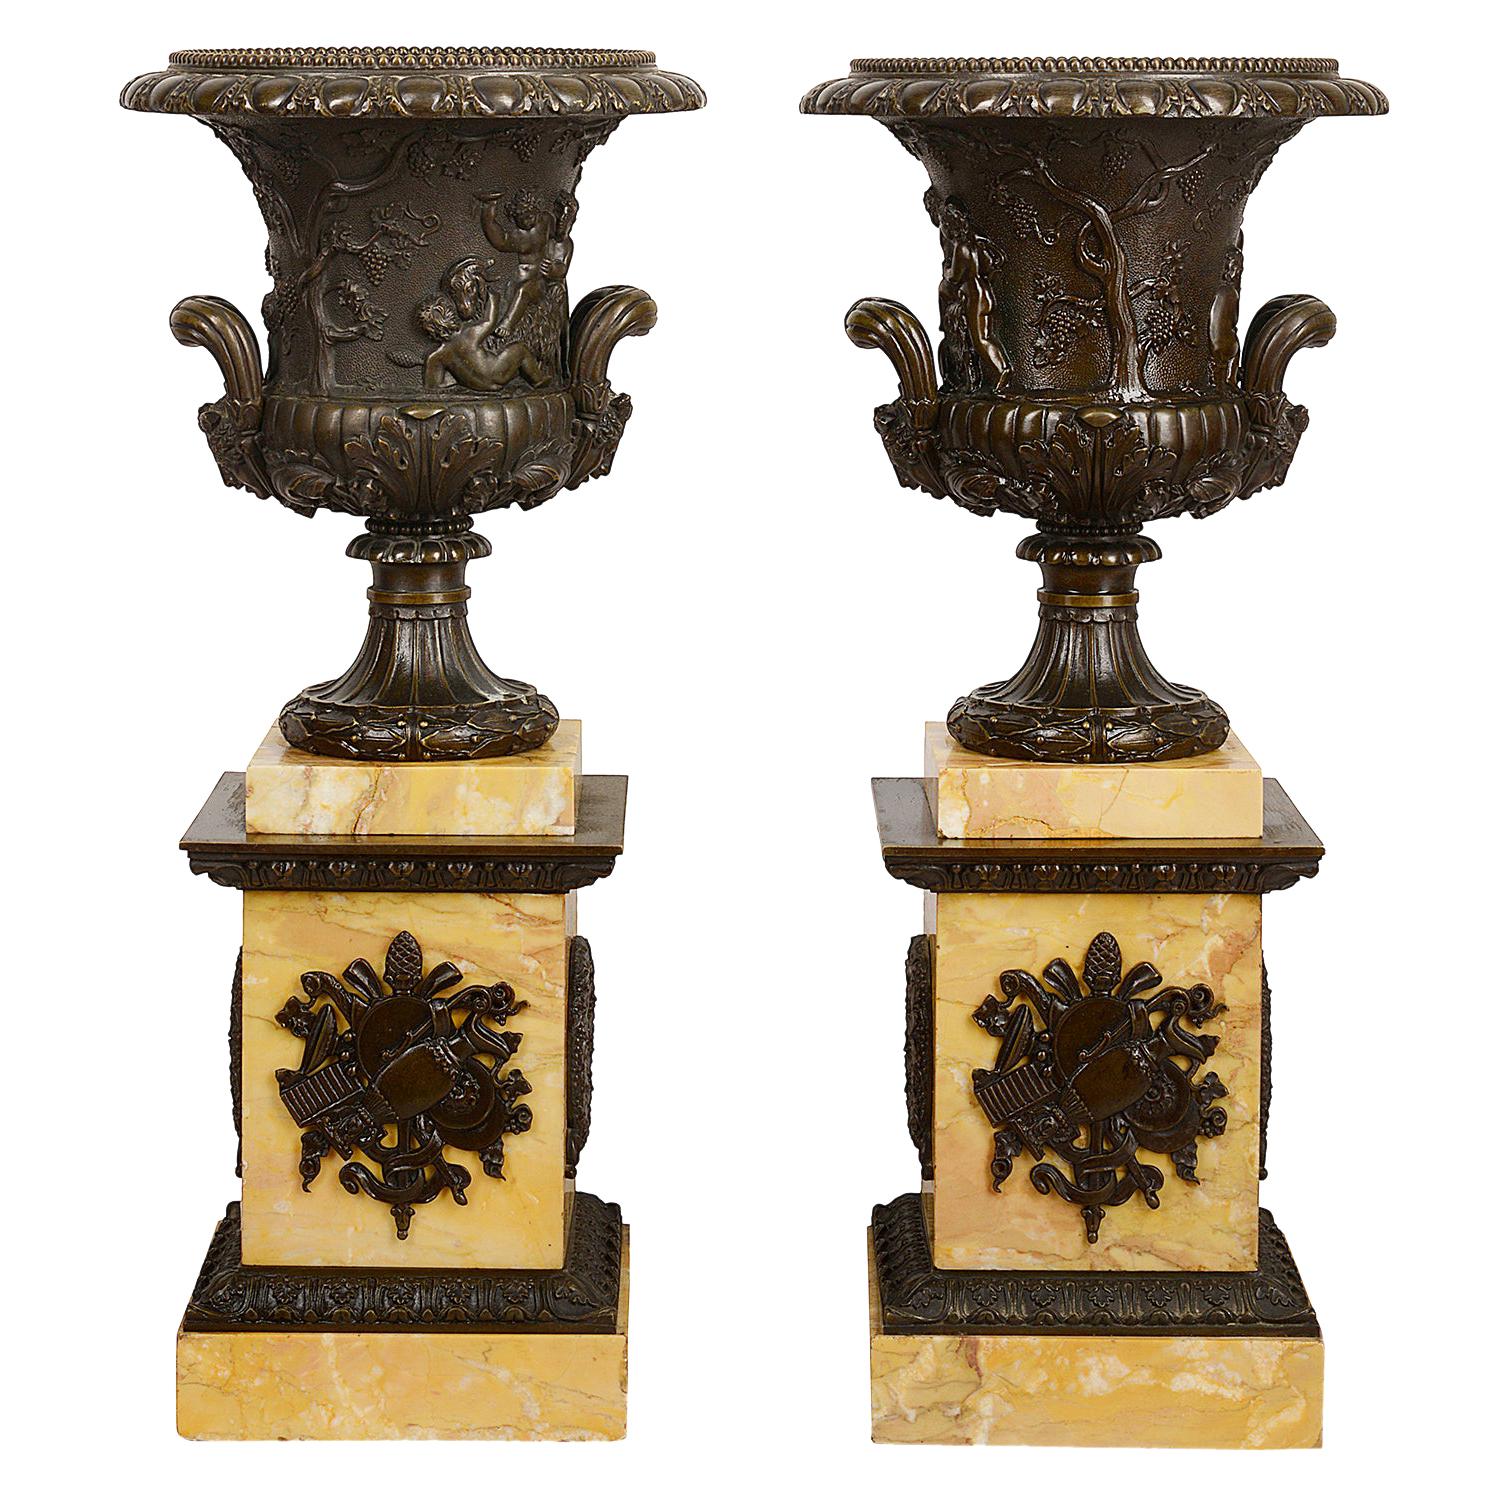 Large Pair of 19th Century Bronze Neoclassical Urns